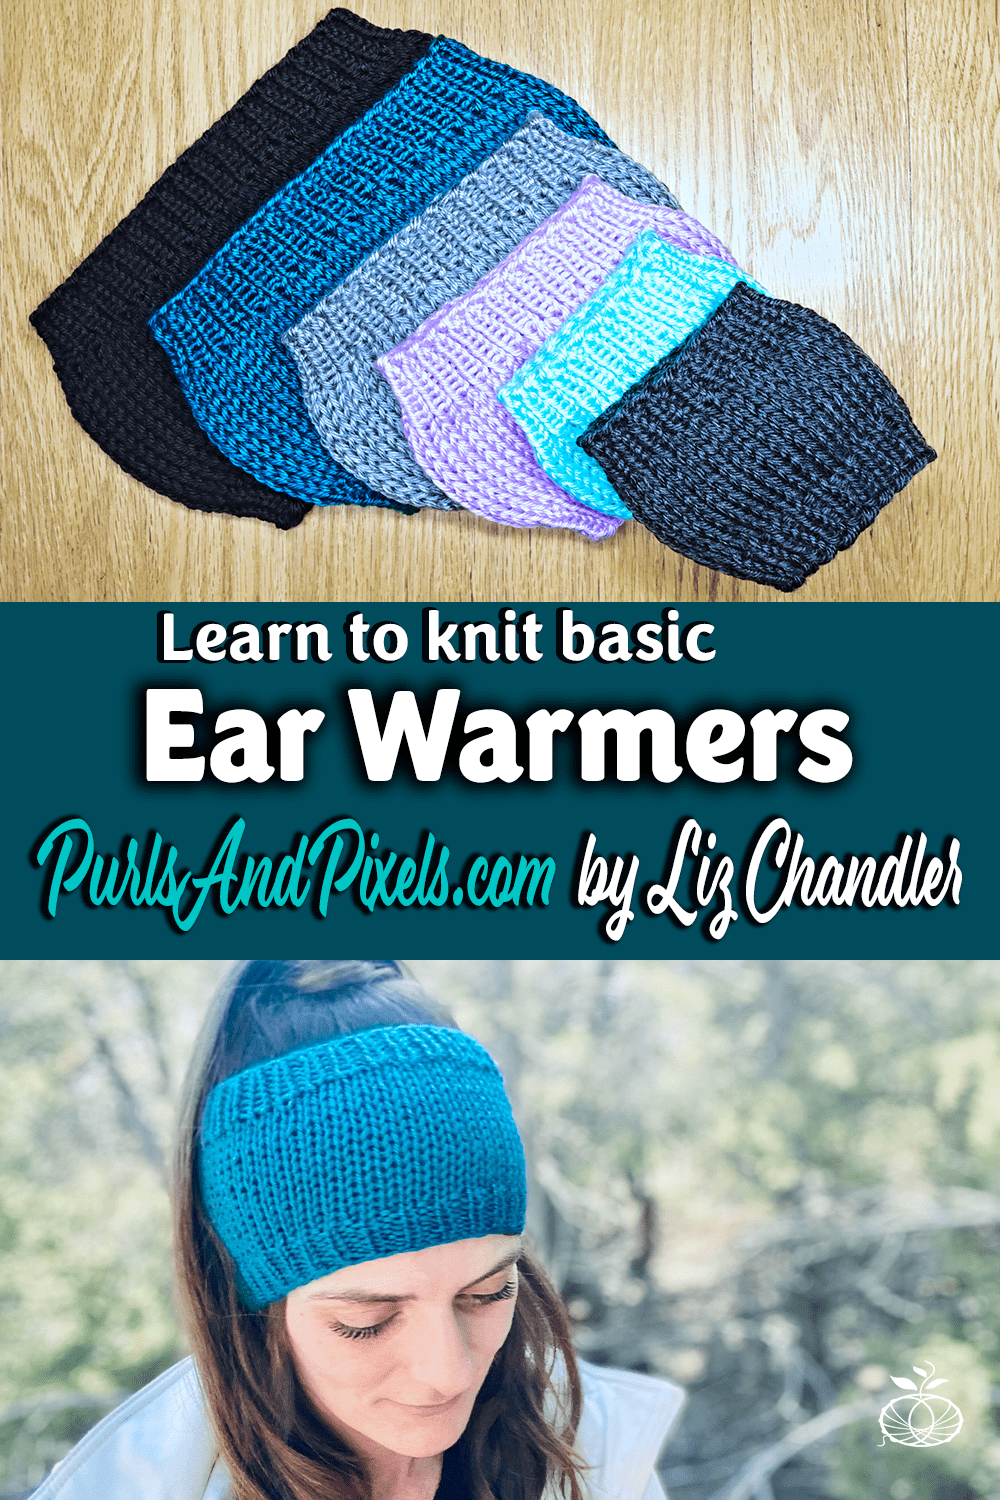 Learn to knit basic ear warmer headbands in this knitting pattern by Liz Chandler @PurlsAndPixels.